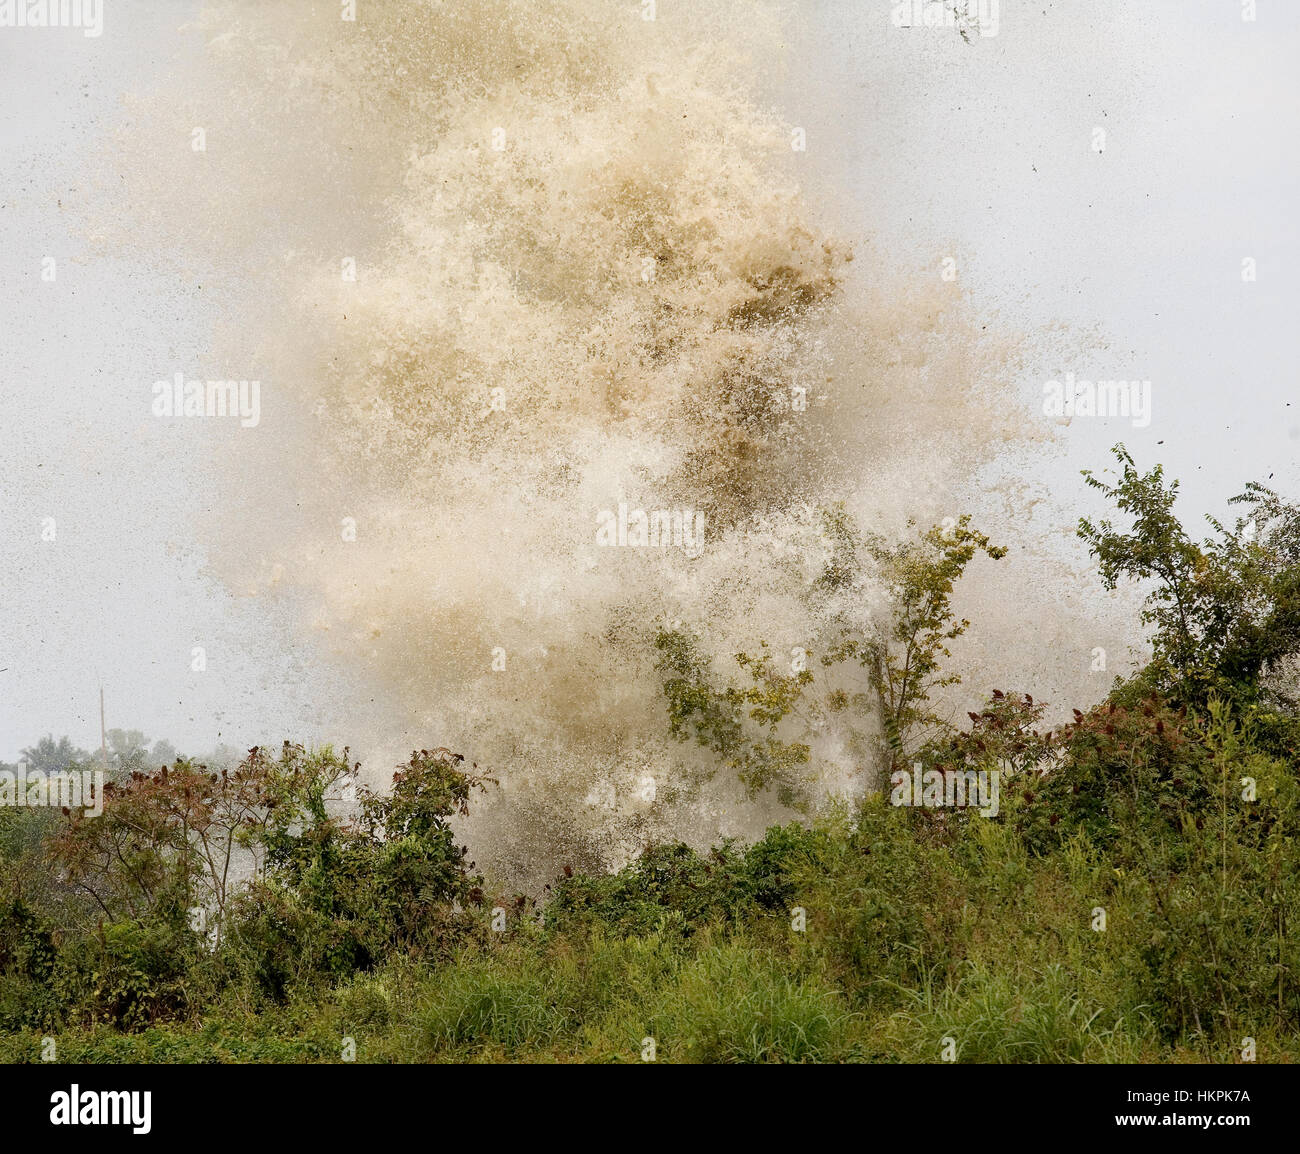 Trees and bushes being innundated with water from an explosion Stock Photo